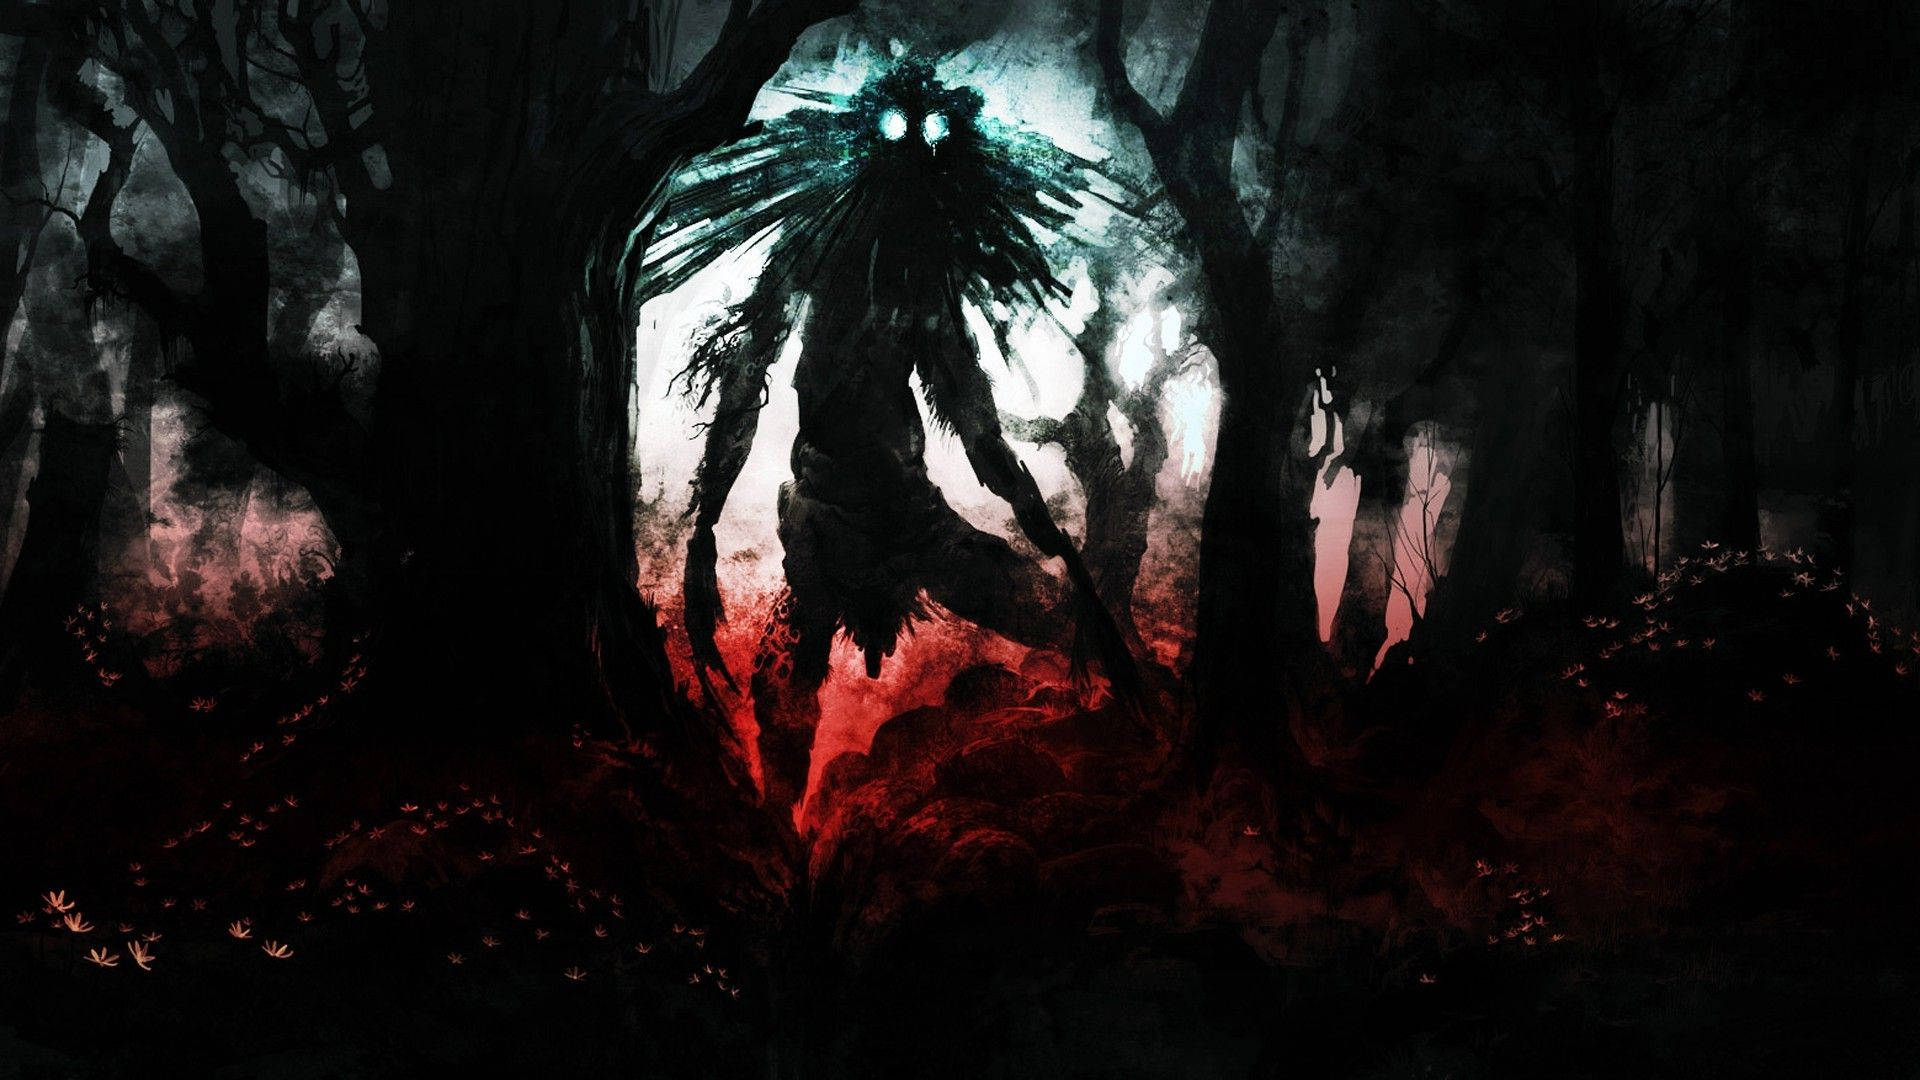 Enter a dark world of the Old Blood with Bloodborne's Celestial Emissary Wallpaper